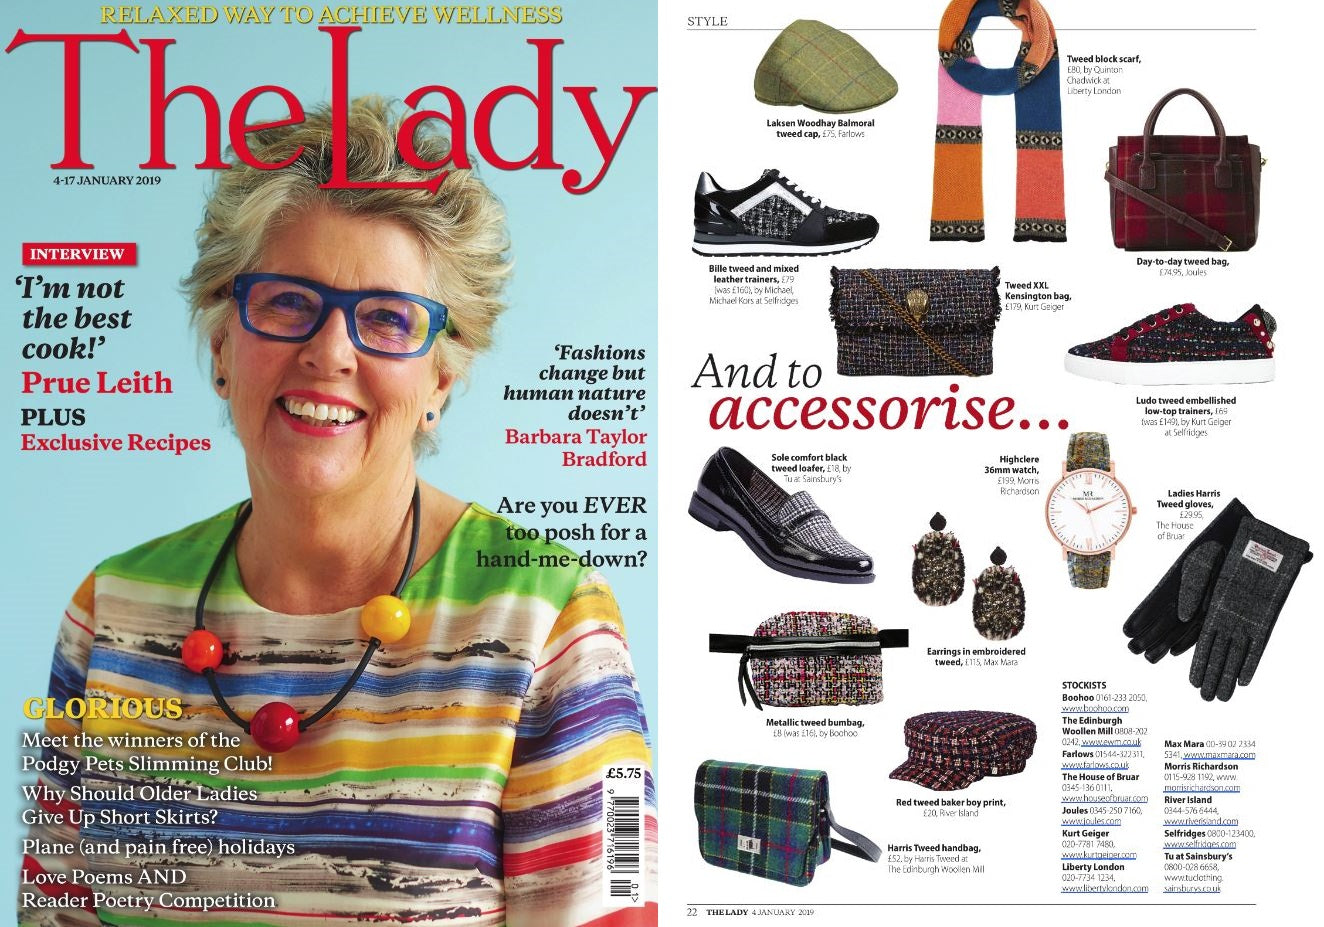 Morris Richardson's Feature in The Lady Magazine